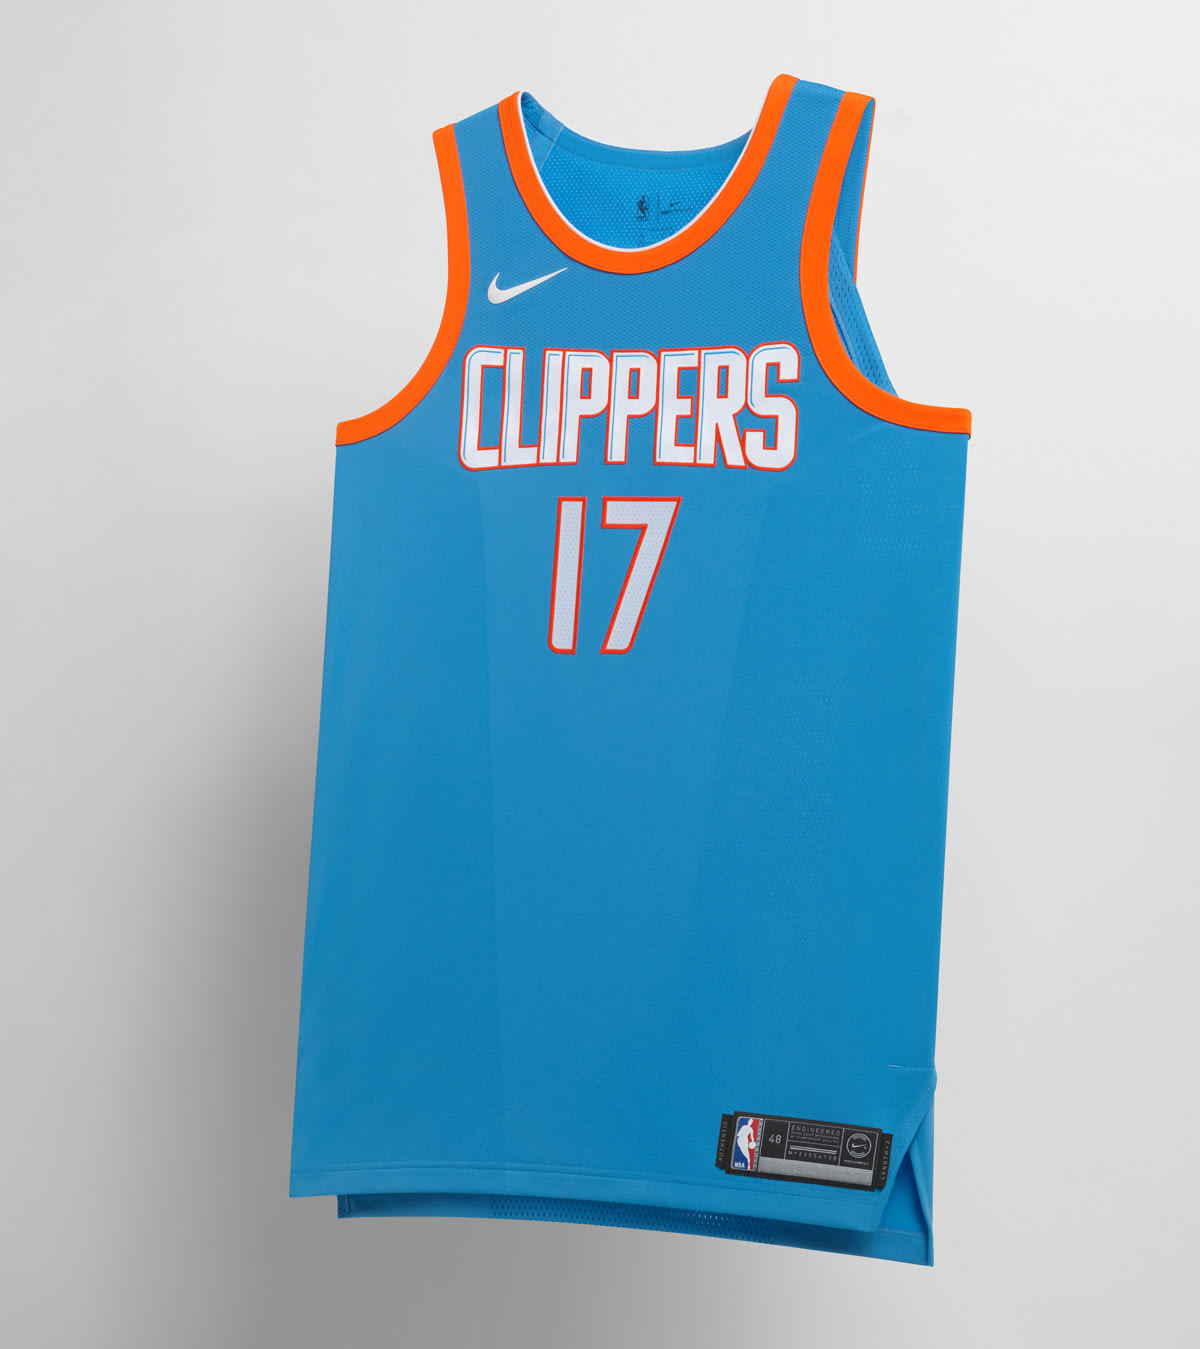 Los Angeles Clippers - Nike NBA City Edition Jerseys ...